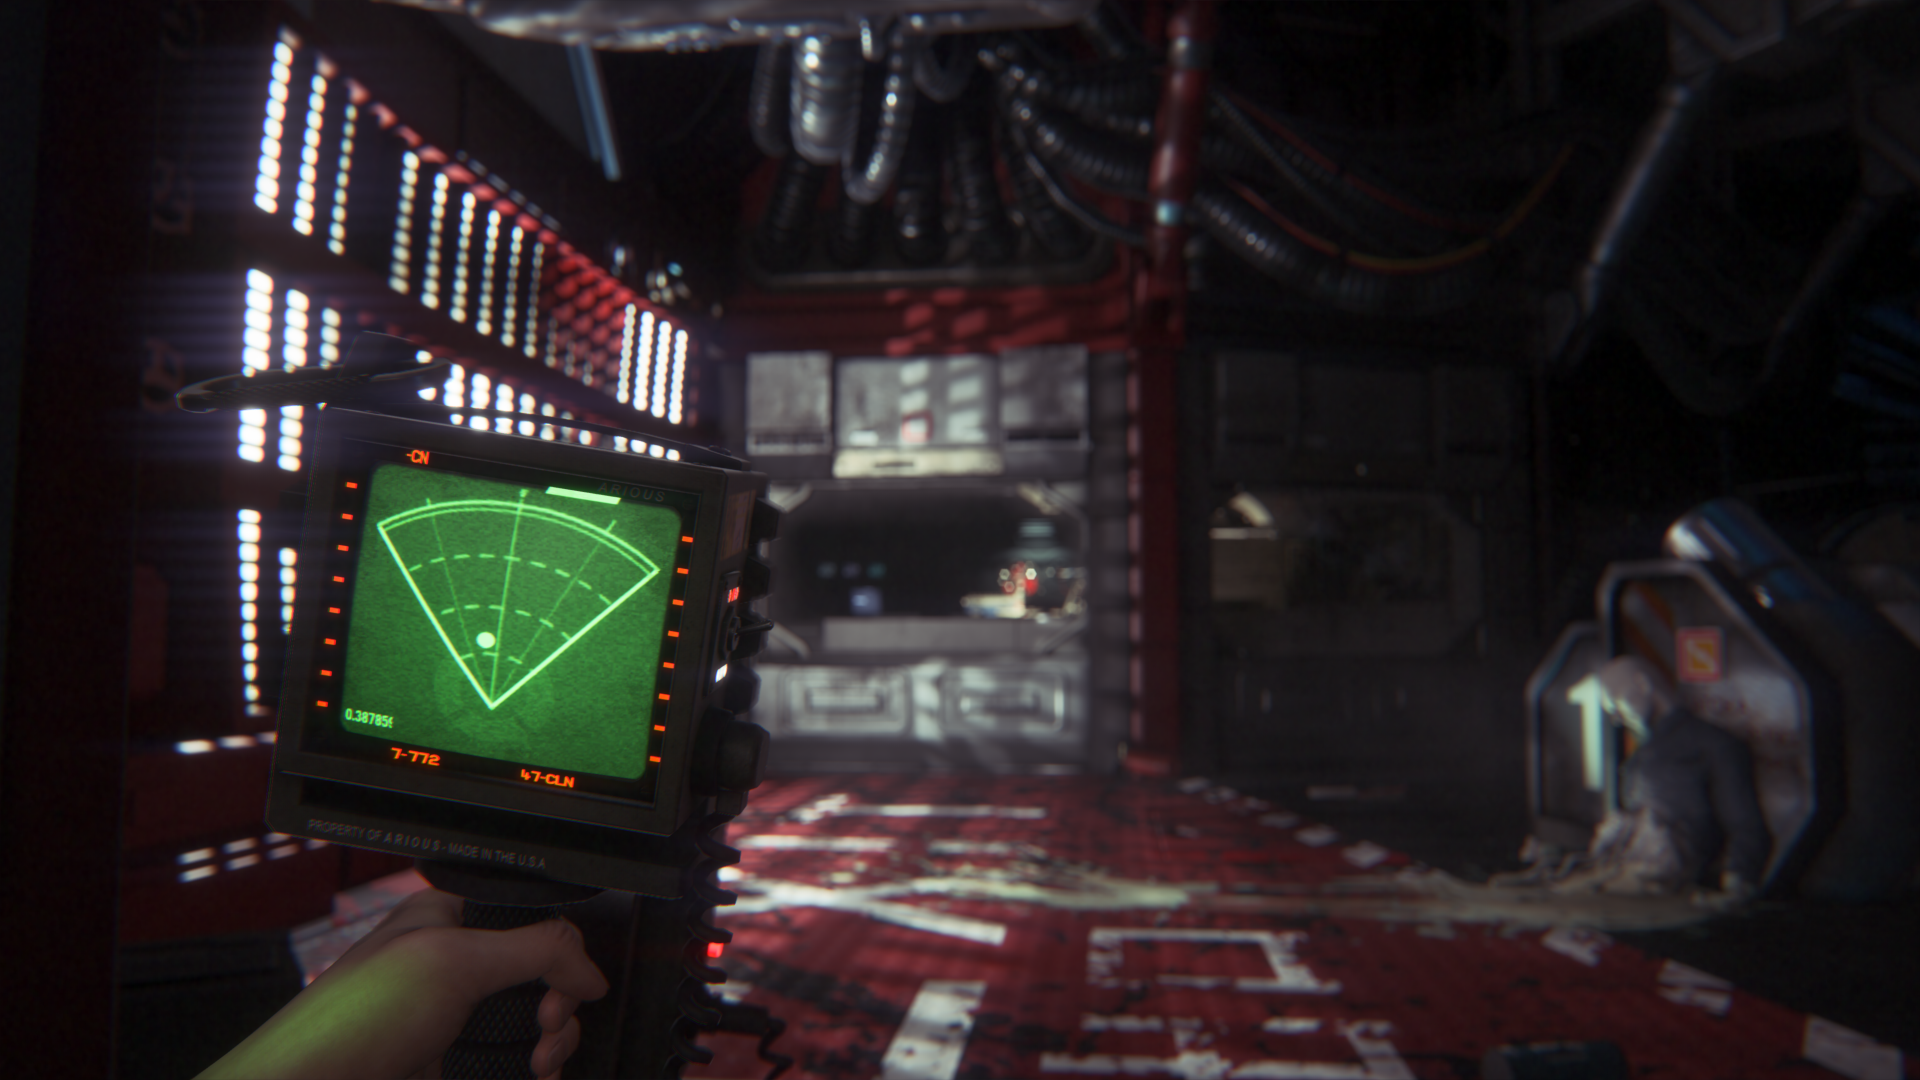 Alien: Isolation – The Collection